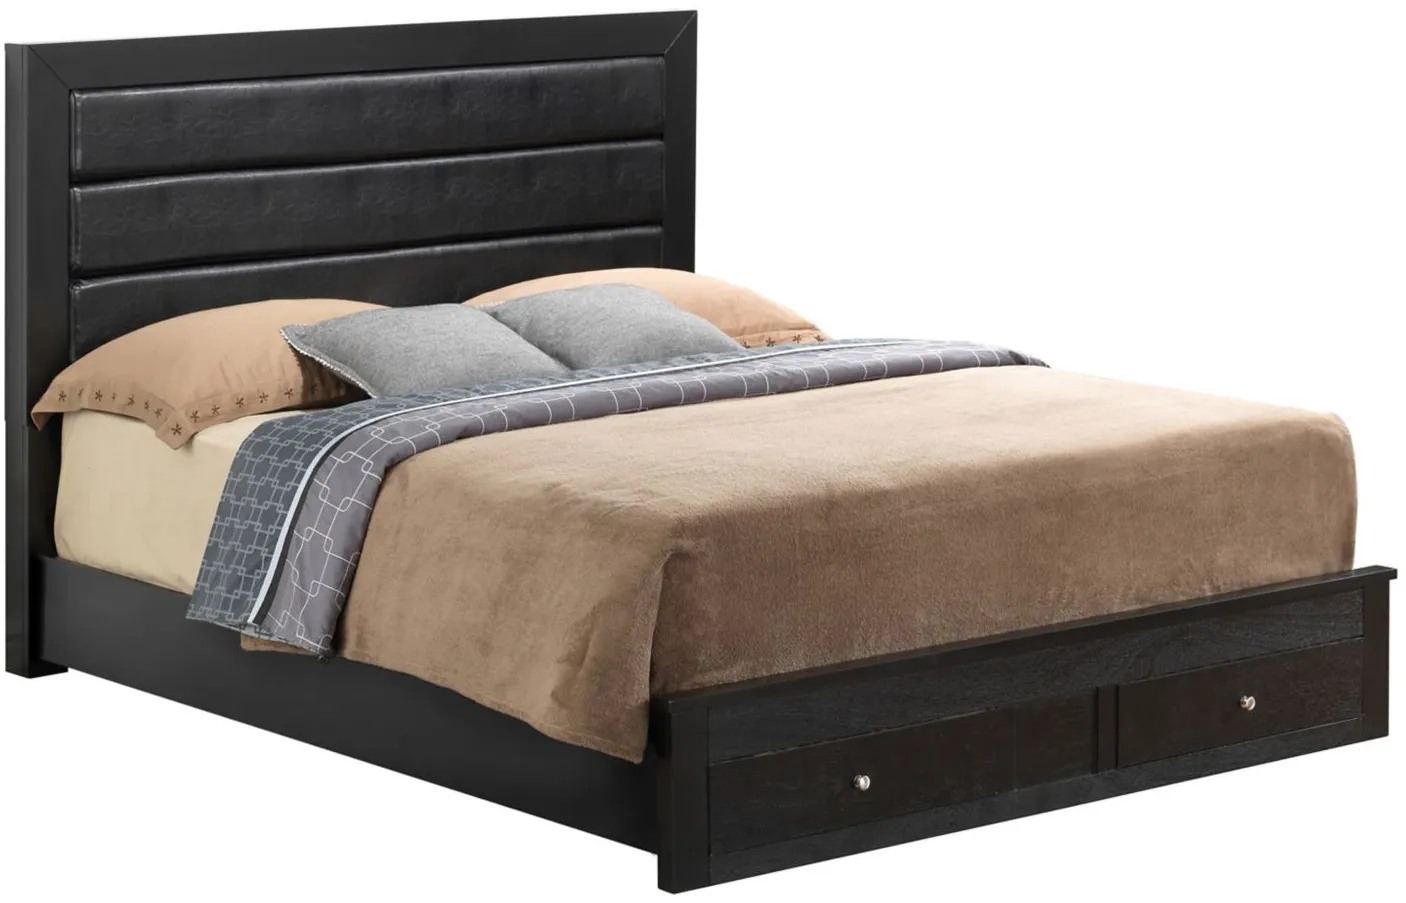 Burlington Queen Storage Bed in Black by Glory Furniture